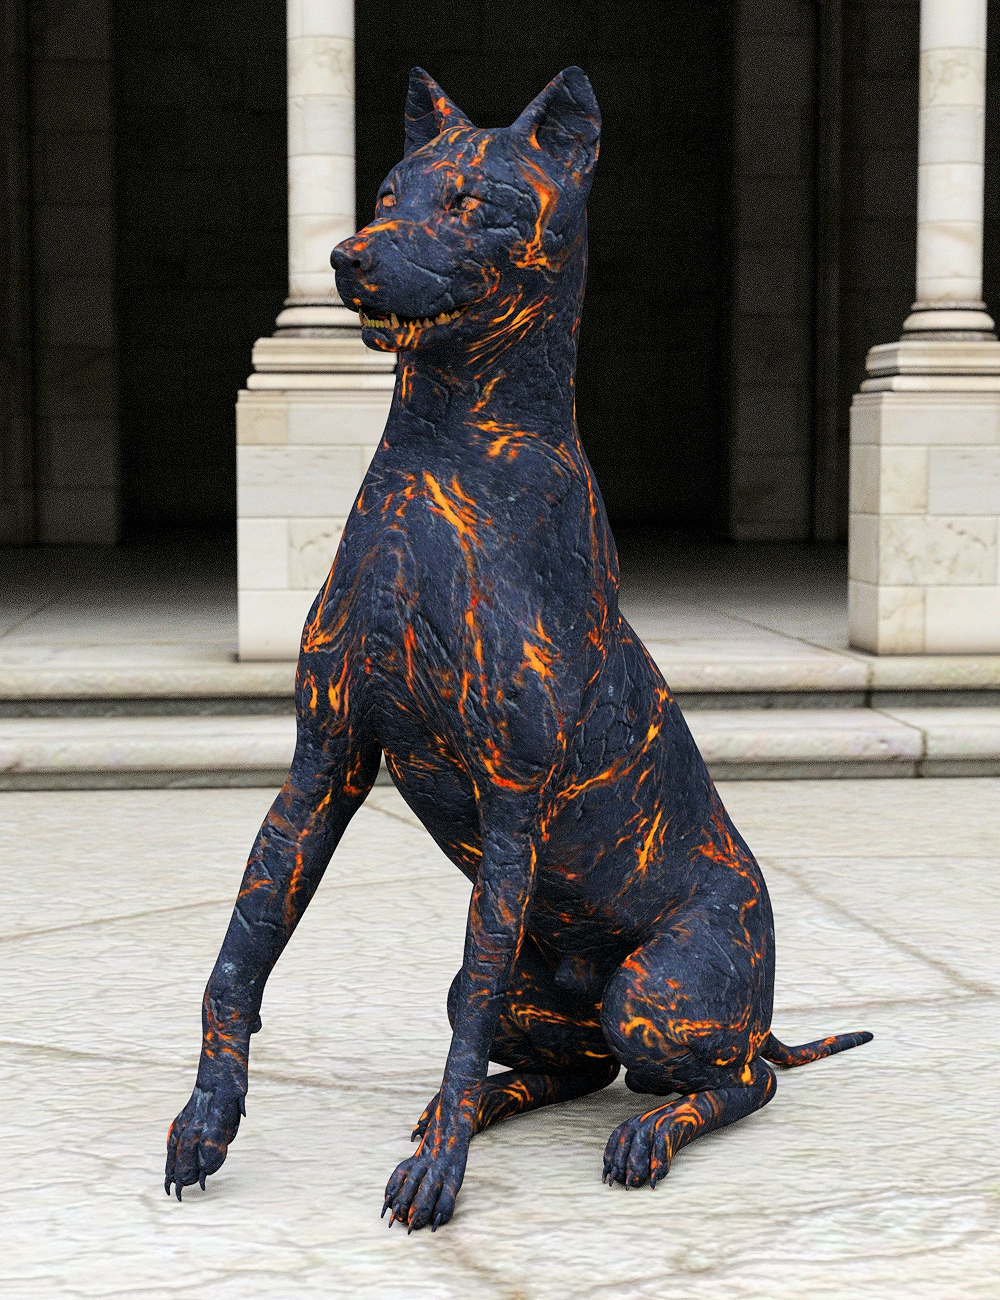 Elemental Companions for Dog 8 by: Khory, 3D Models by Daz 3D